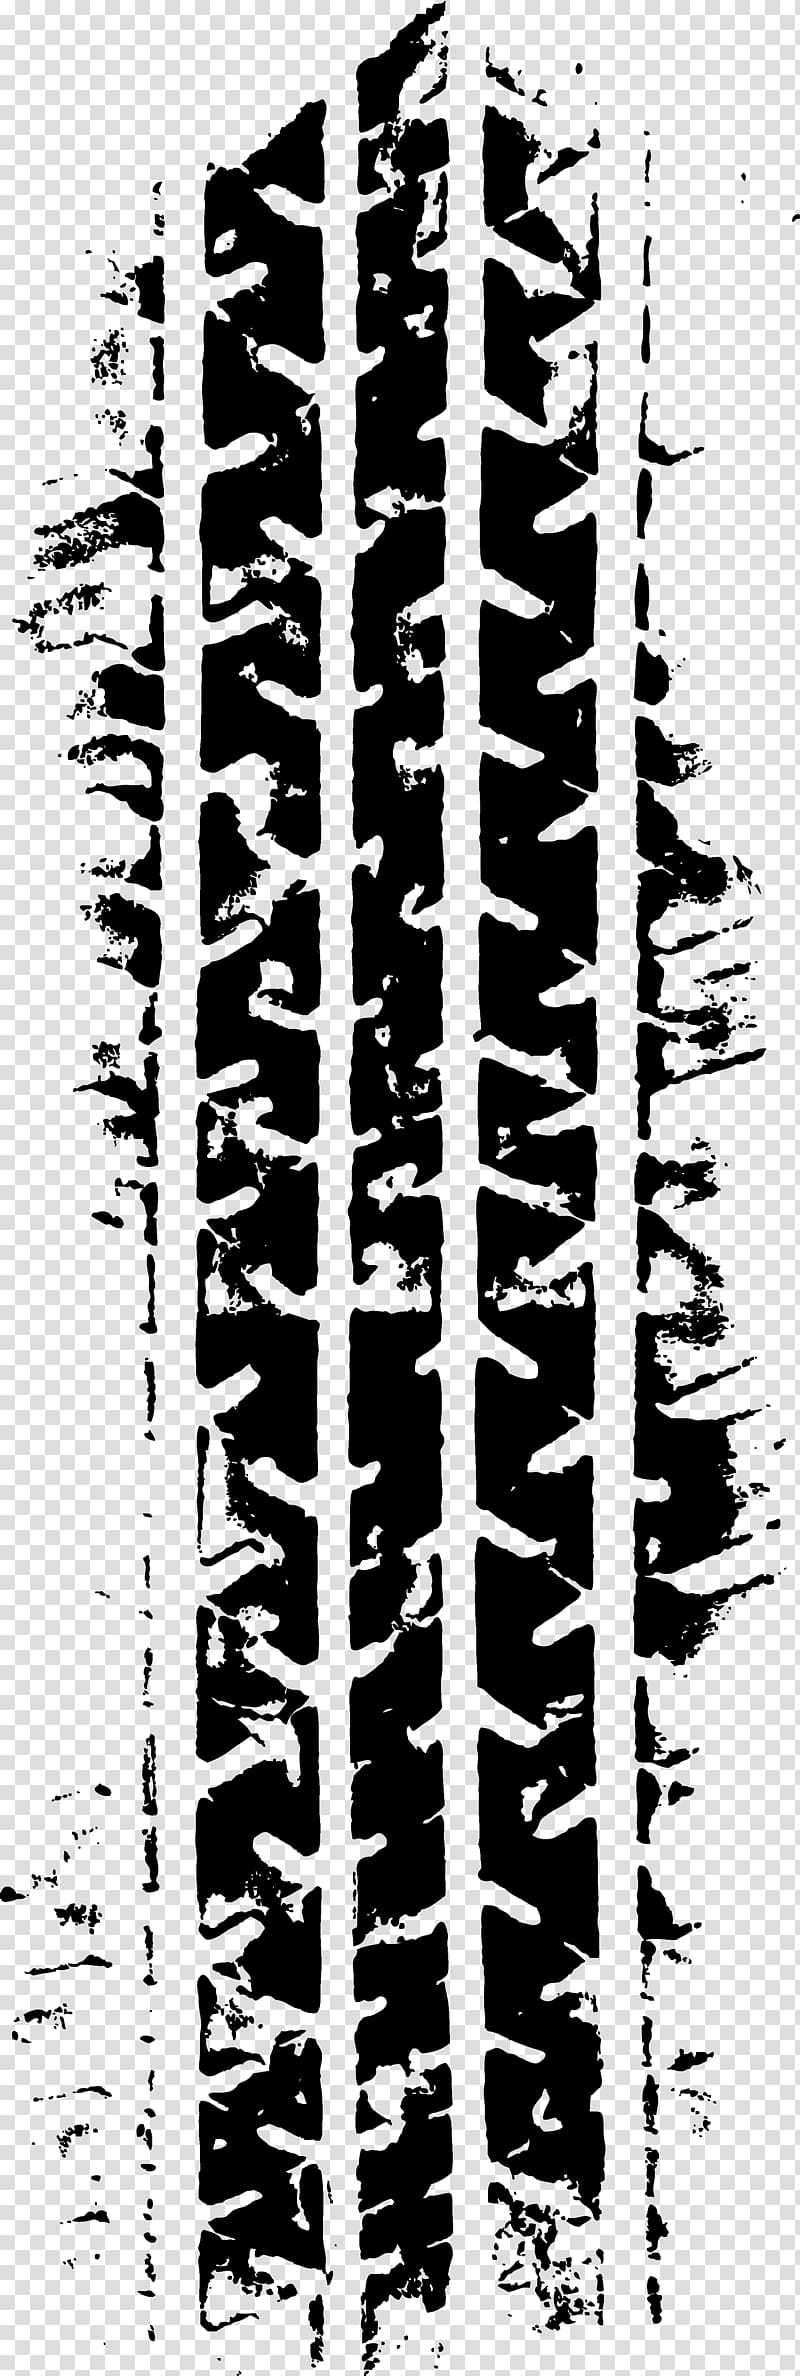 Tire Tread Skid mark Car, Tire tracks transparent background PNG clipart